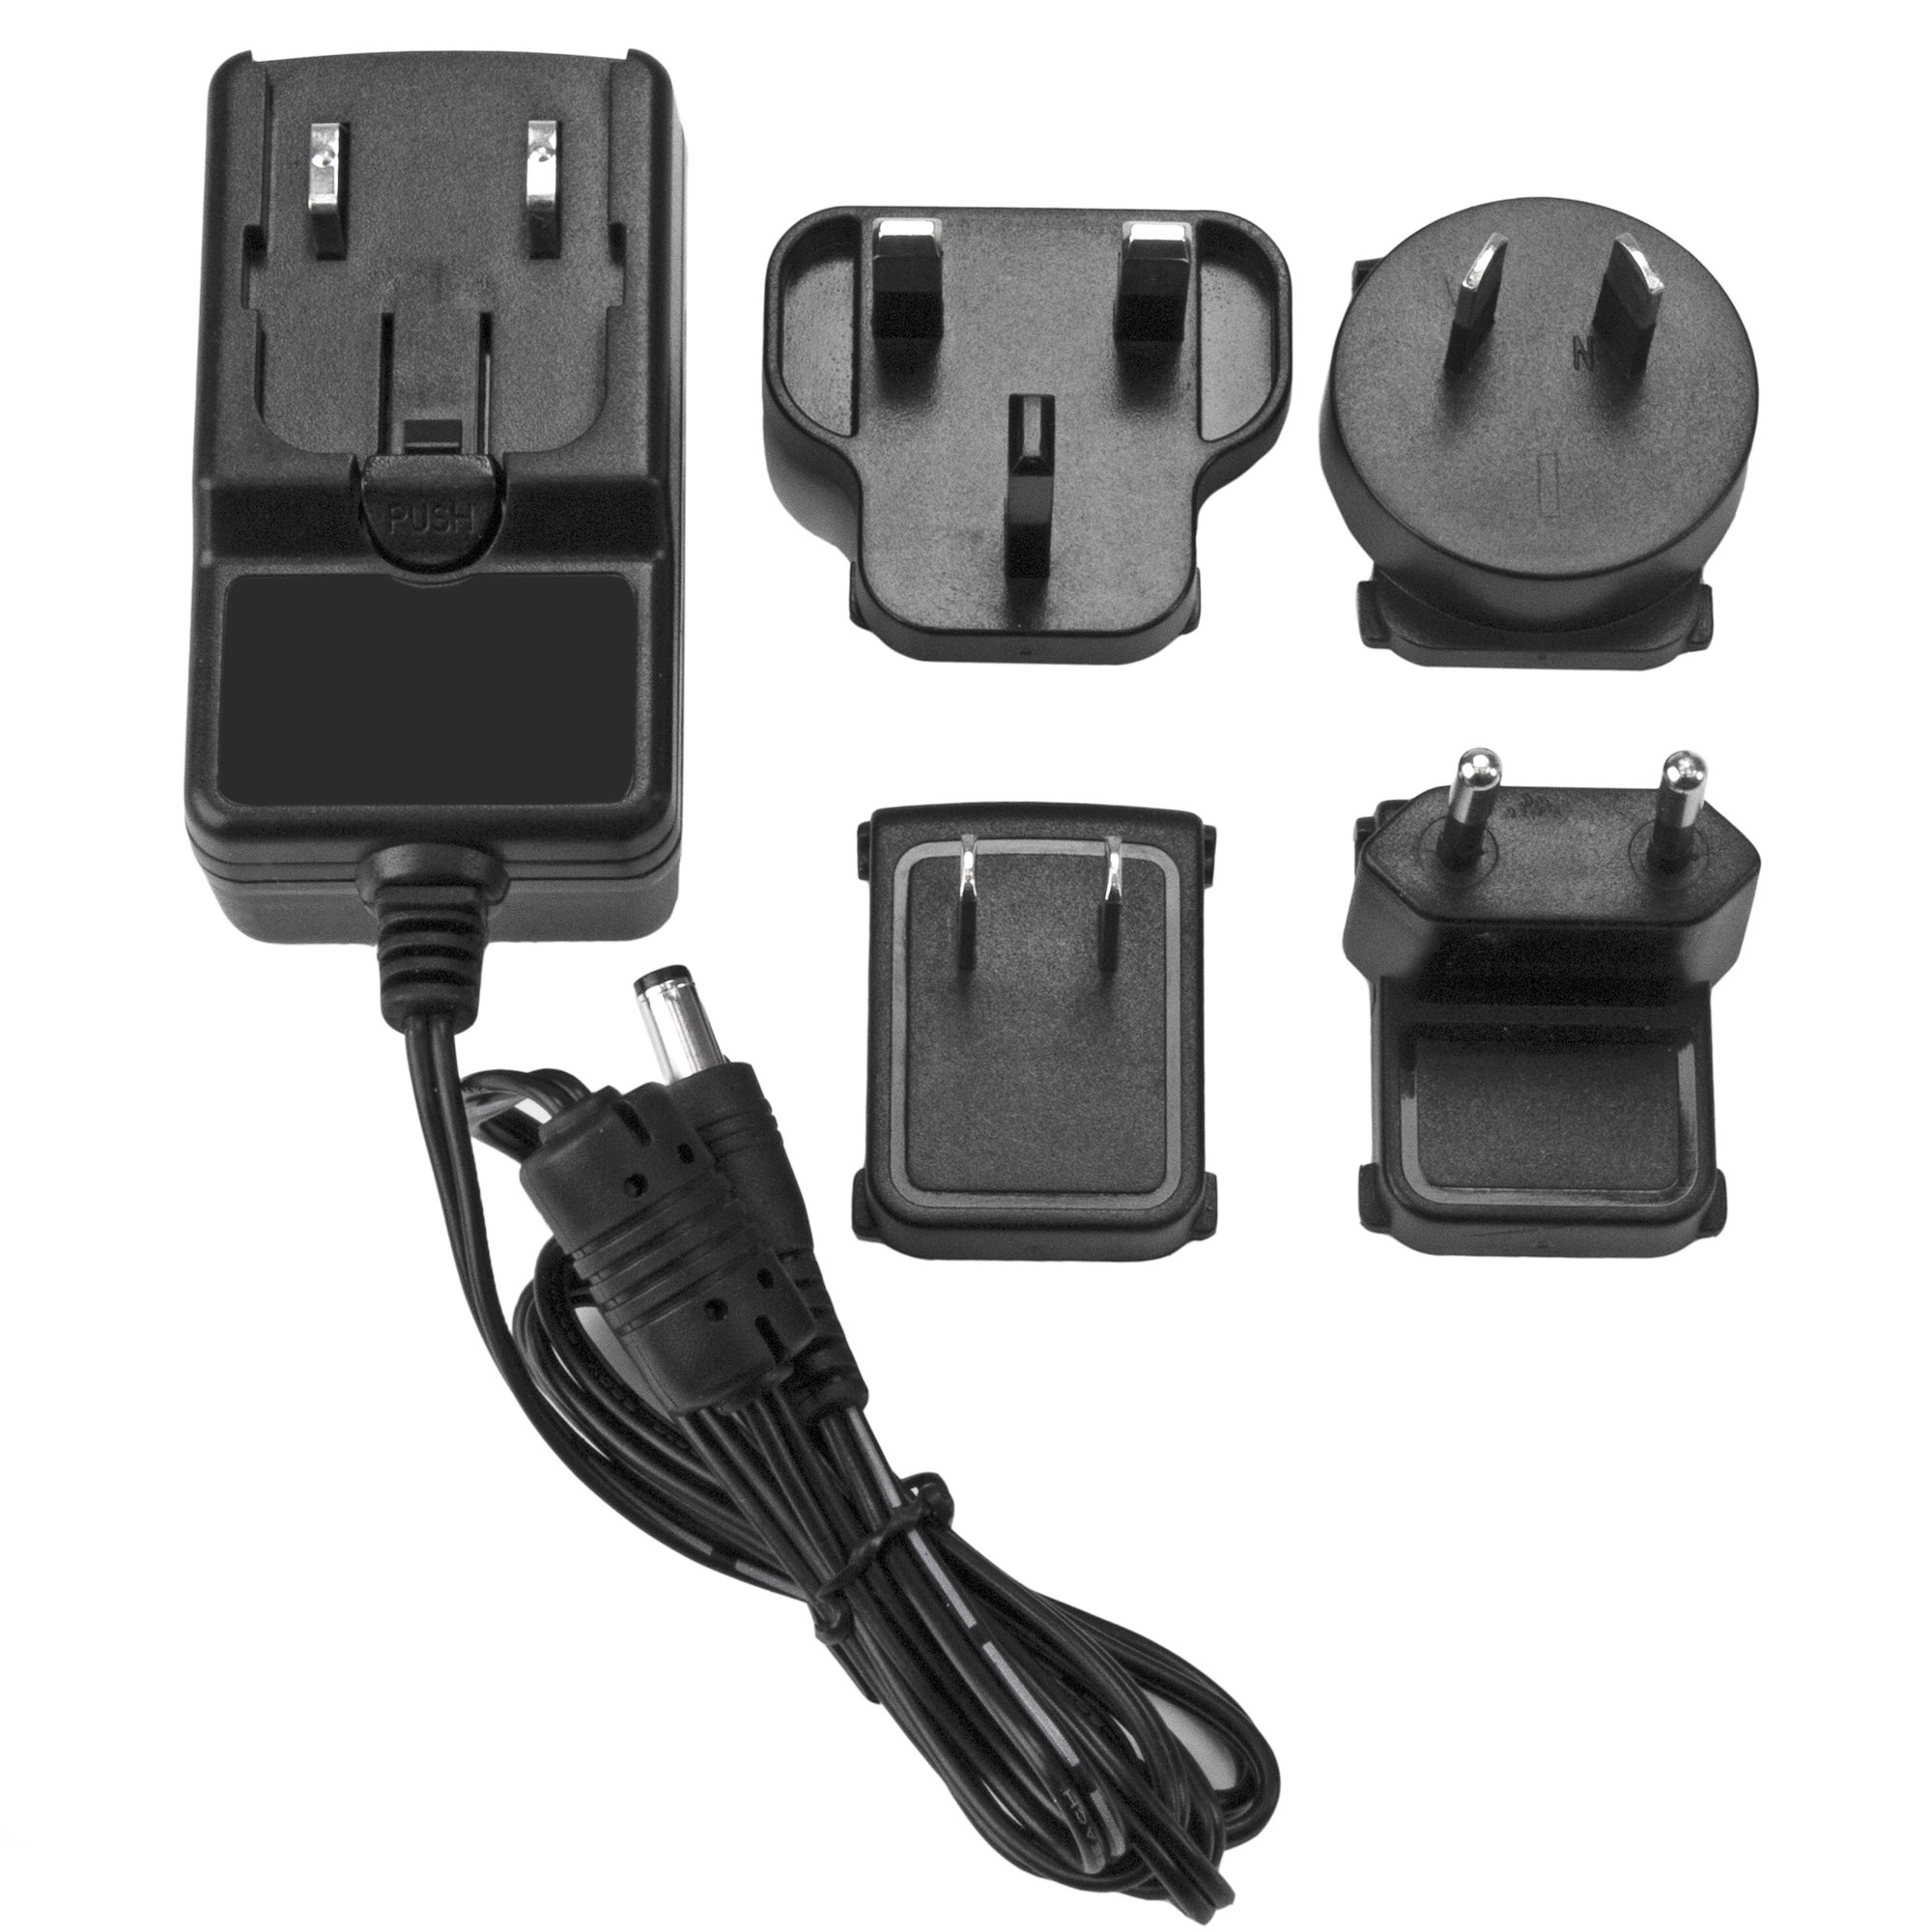 12V DC 1.5 Amp and 5V DC 1.5 Amp Dual Output Power Supply Power Adapter w/ Cable 